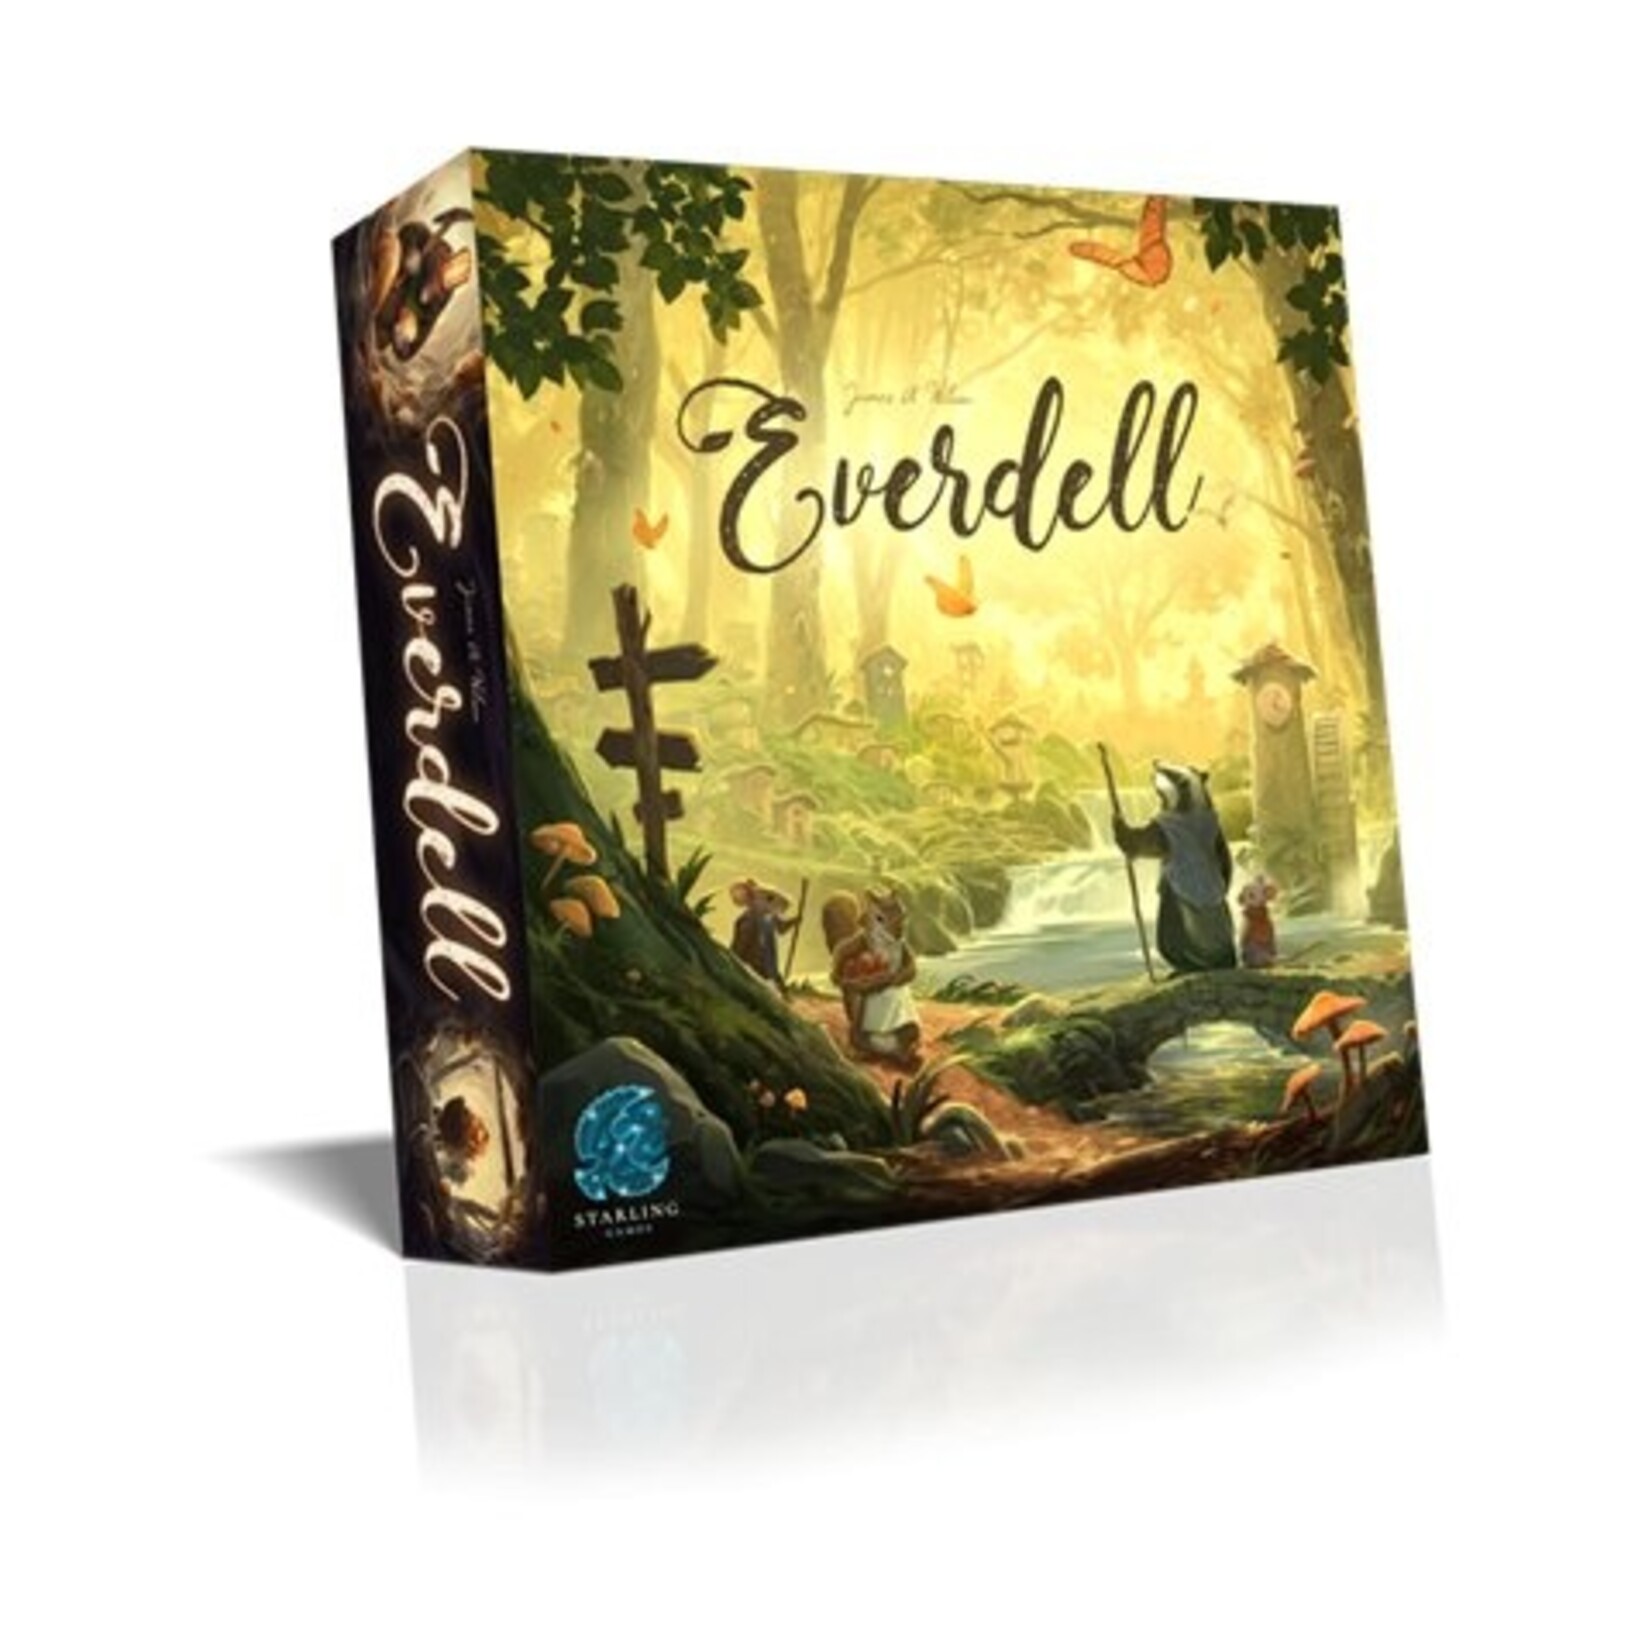 Starling Games (II) Everdell Standard Edition 3rd Edition - EN